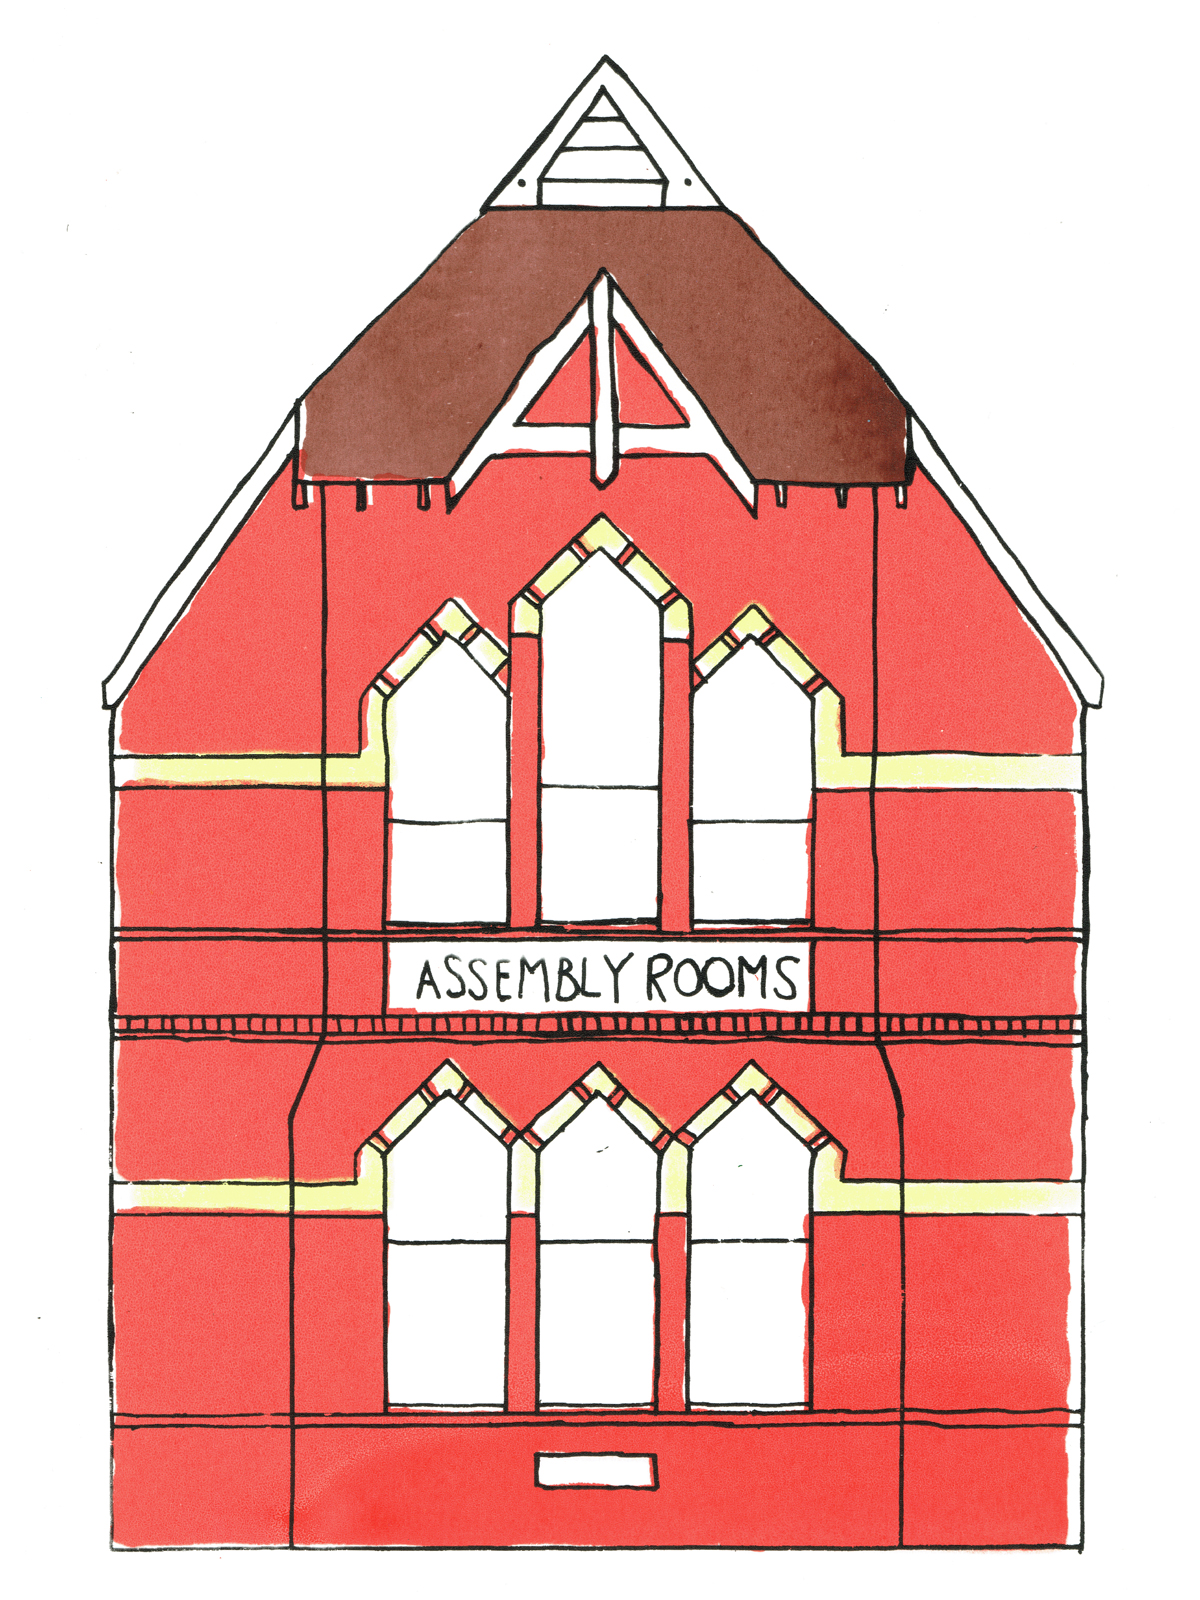 A screen print of the Assembly Rooms